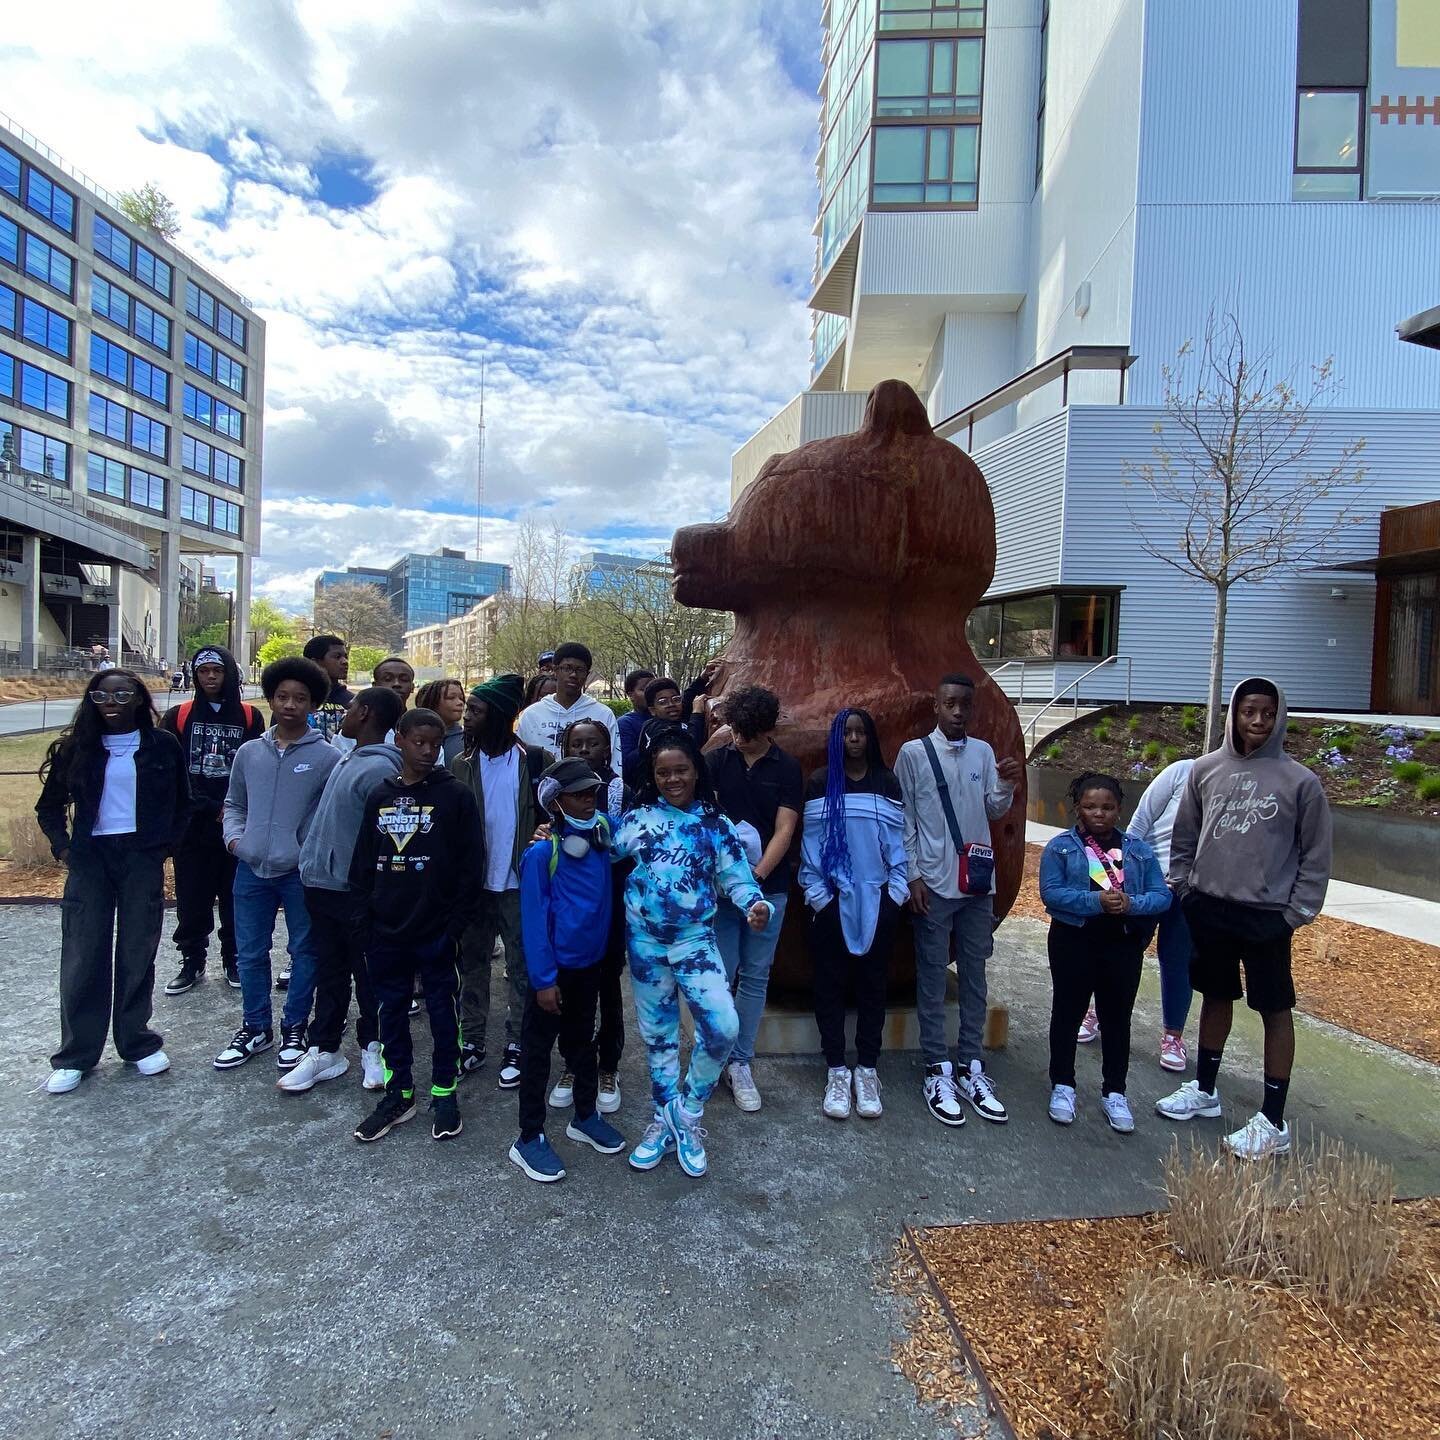 Kids On Point @ A+ Squash ⭐️ 
A fantastic Saturday with @kidsonpointchs visiting us from Charleston, SC! We started the day with a walk up the Beltline, taking in some of Atlanta&rsquo;s most iconic scenery. The afternoon was full of exciting matches